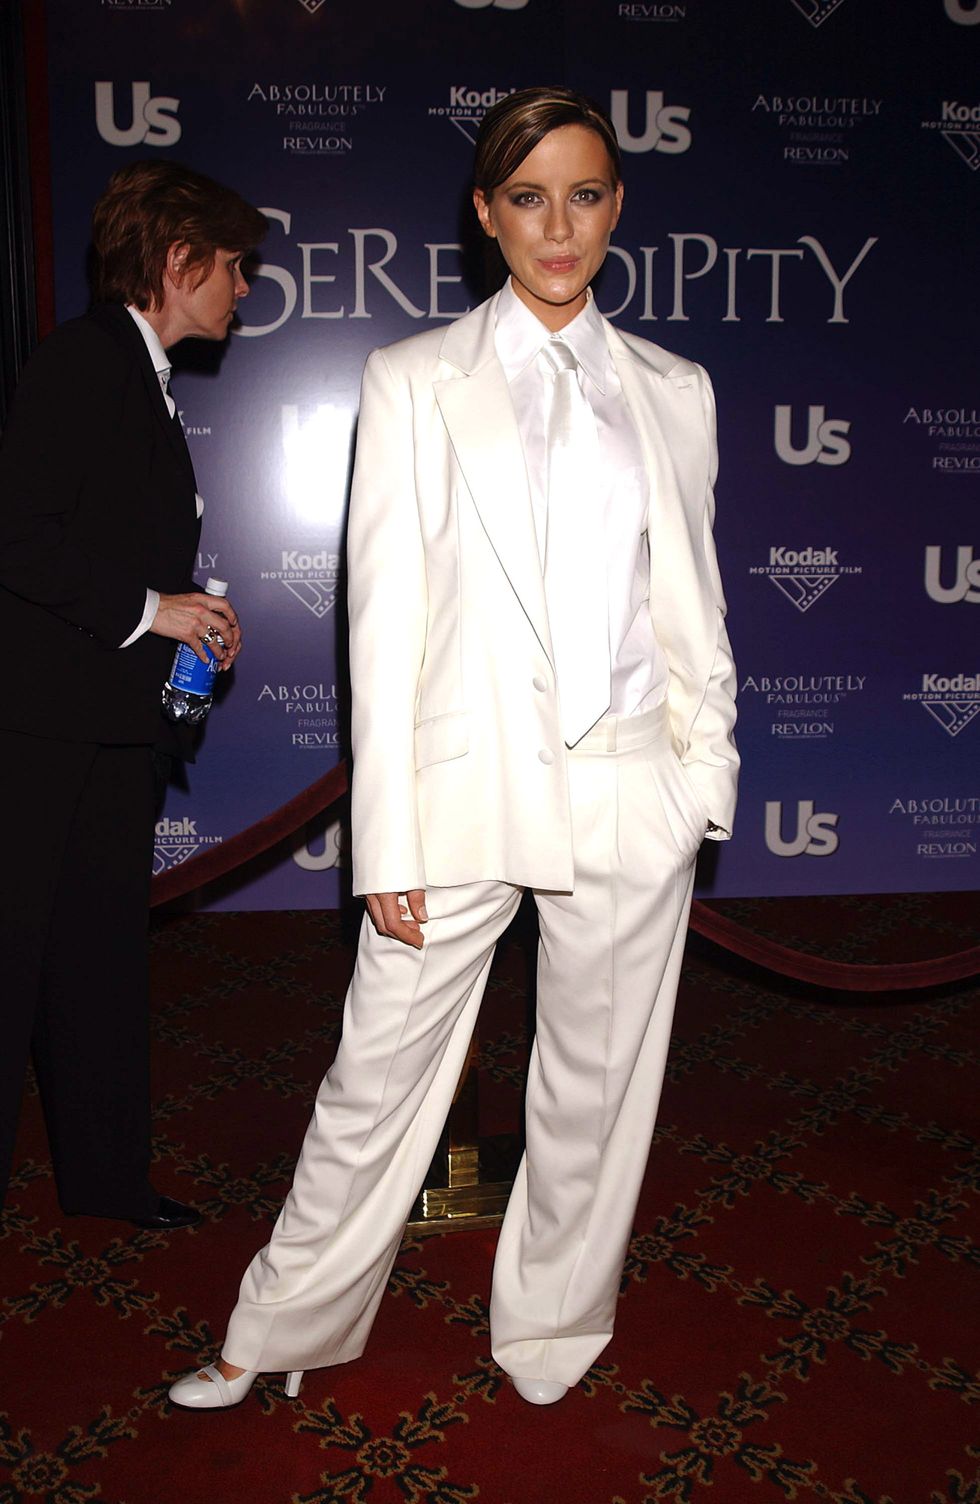 "Serendipity" - Premiere in New York City